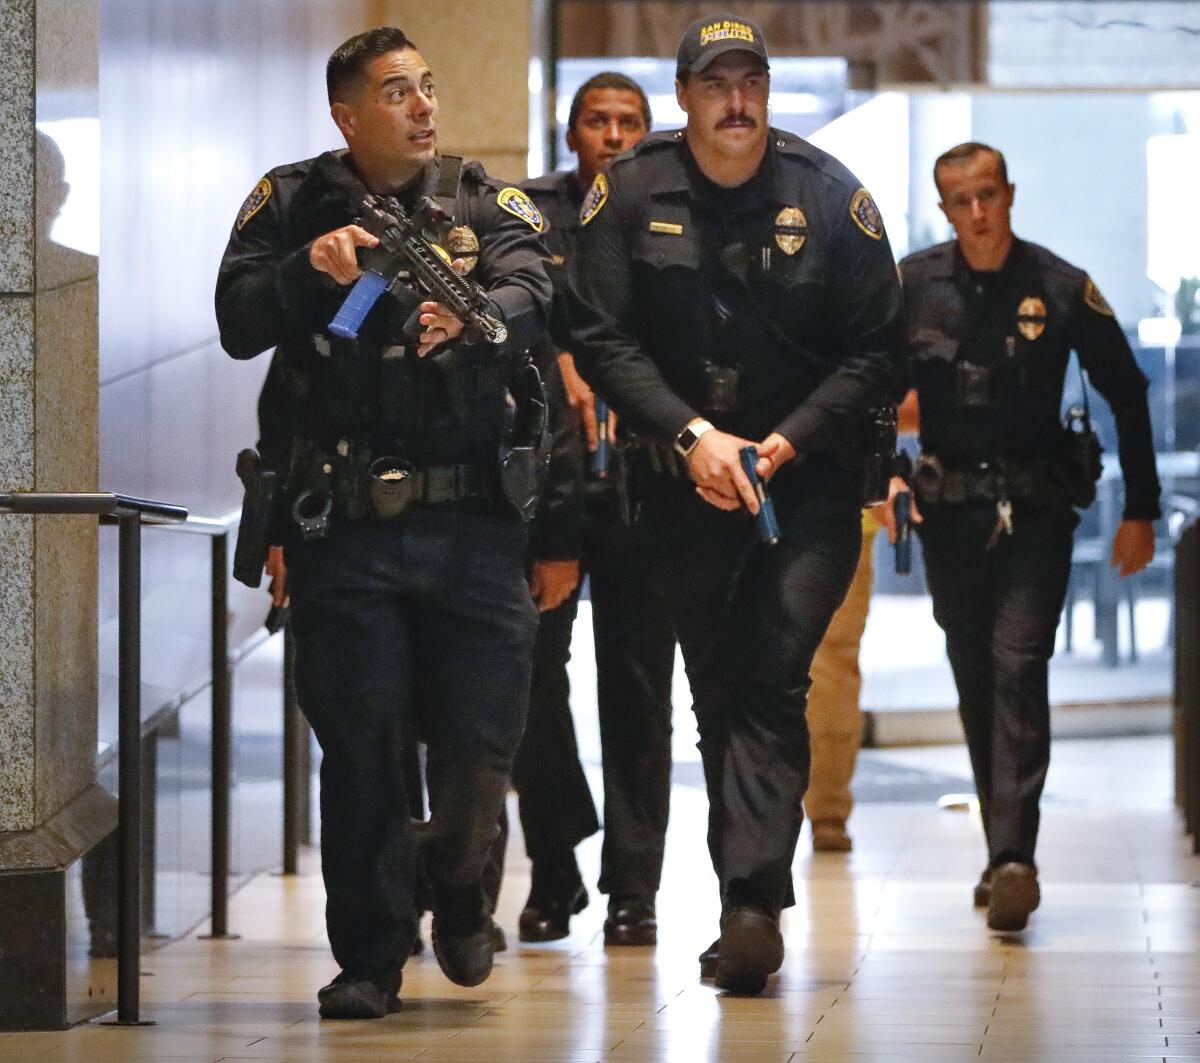 San Diego police officers enter the Westin San Diego Hotel in downtown San Diego on Aug. 17, 2019.